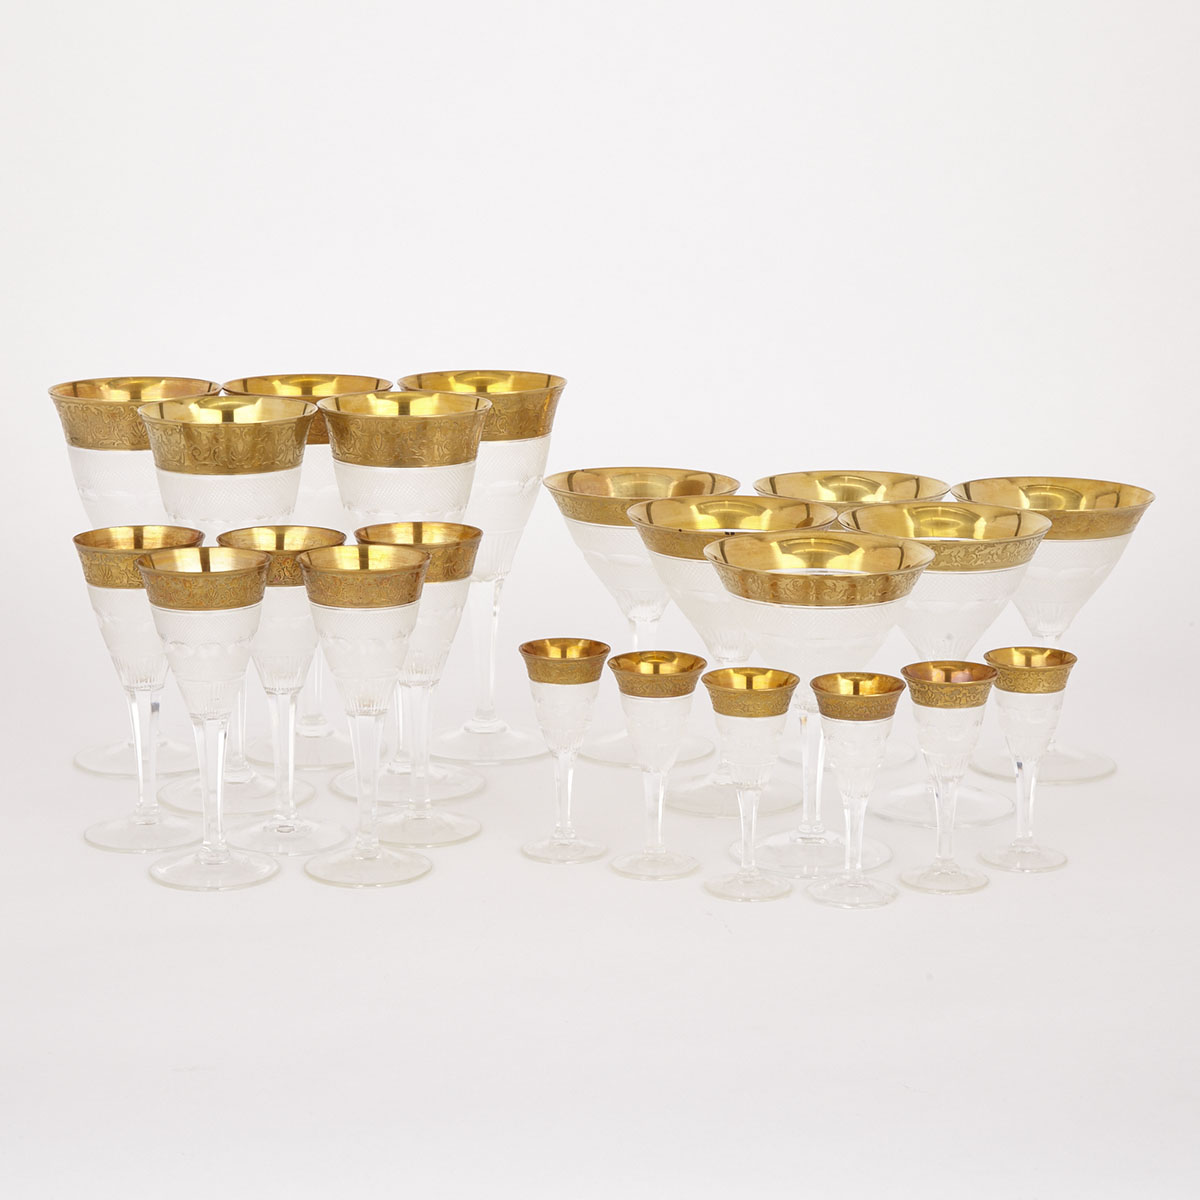 Moser ‘Splendid’ Pattern Cut and Etched Gilt Glass Service, 20th century